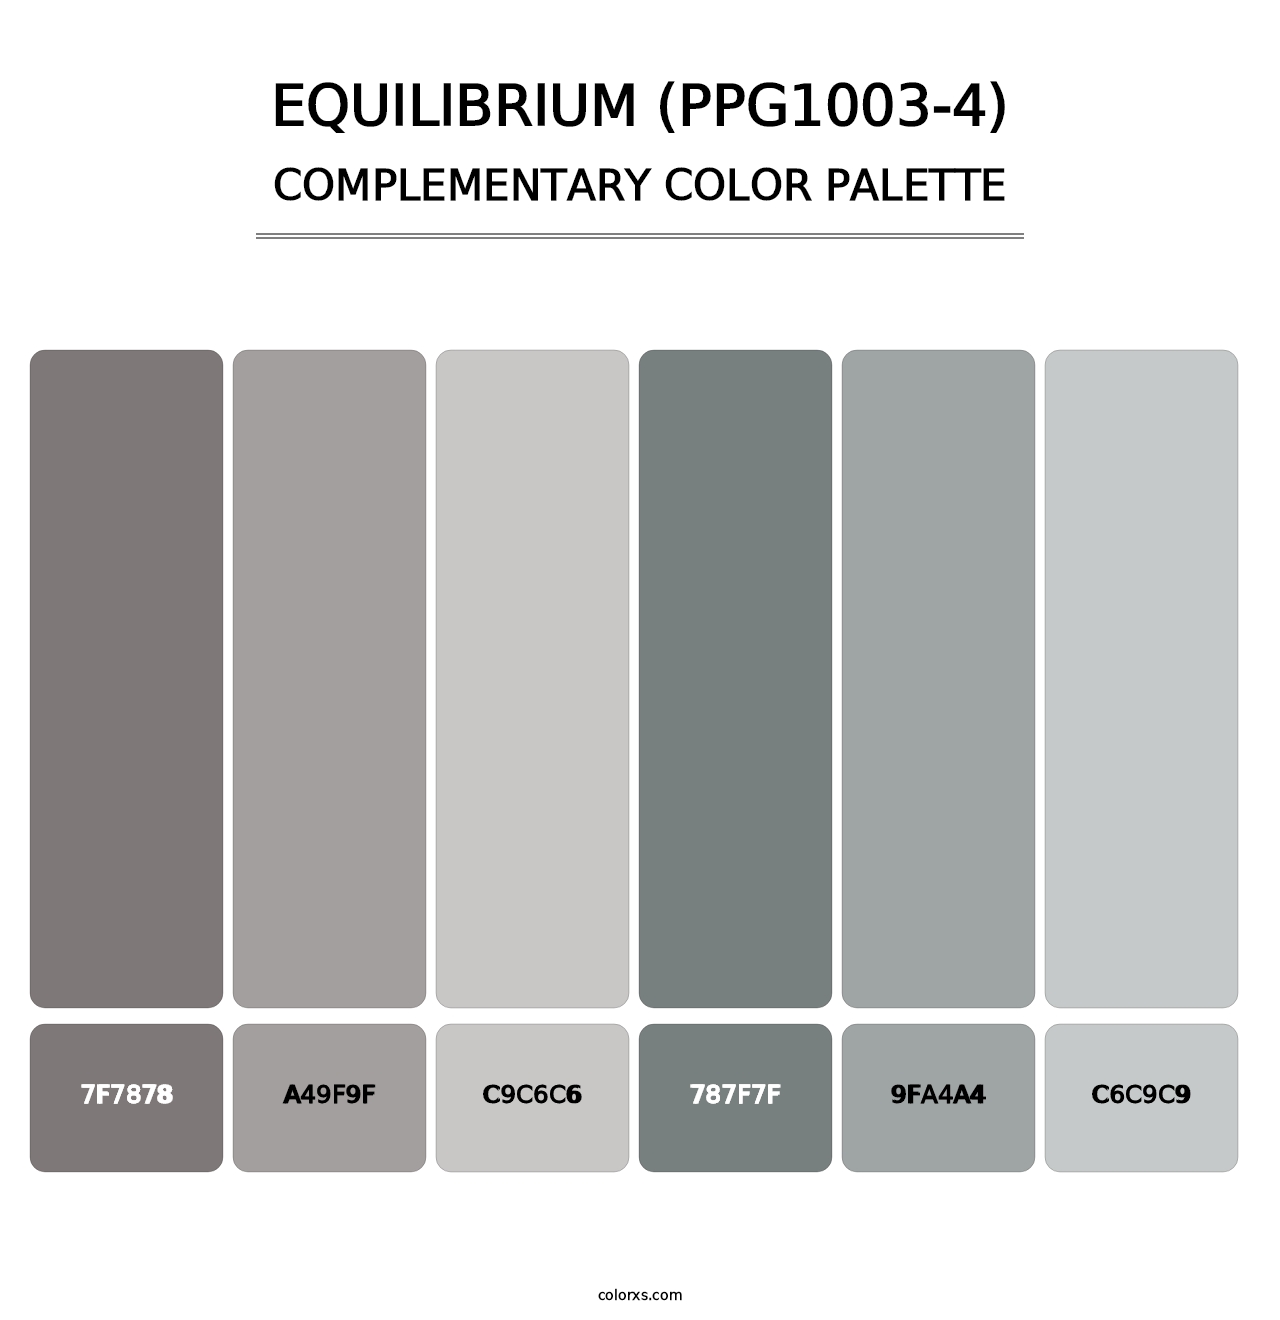 Equilibrium (PPG1003-4) - Complementary Color Palette